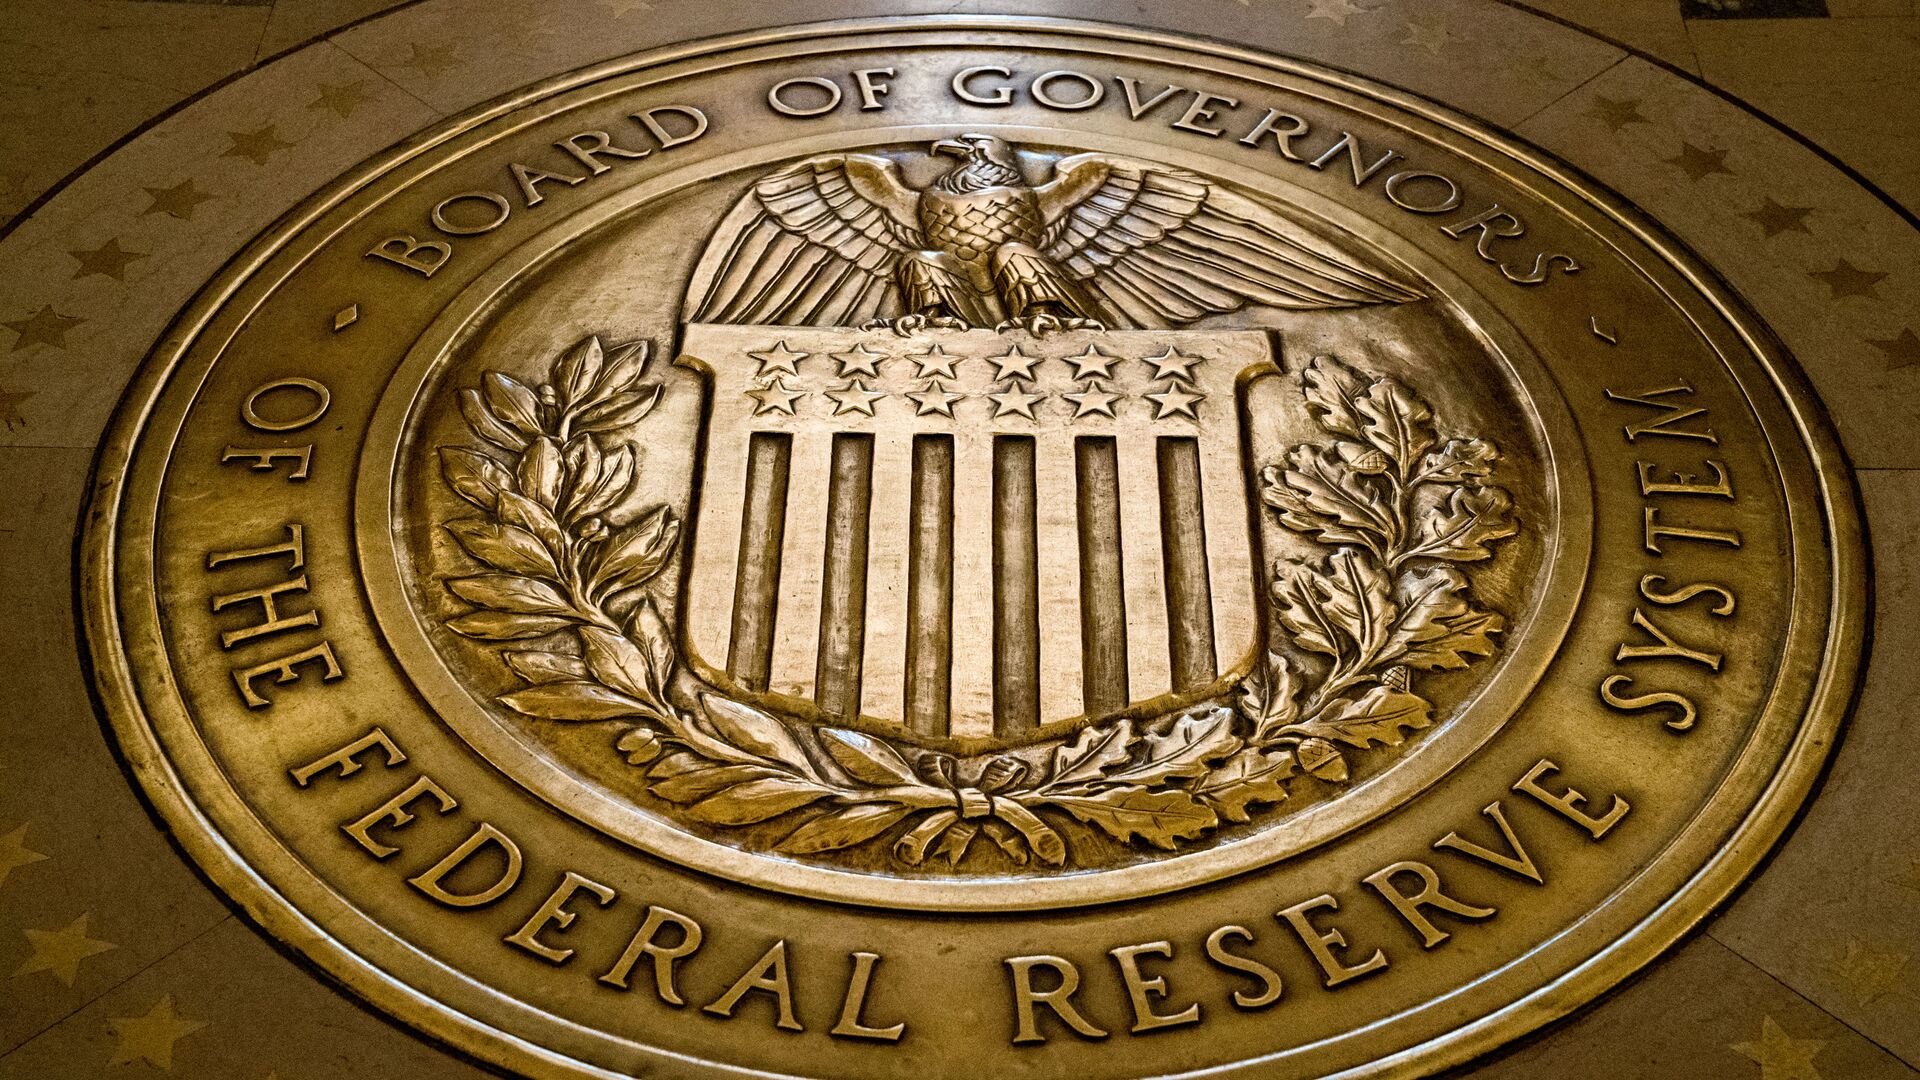 FILE- In this Feb. 5, 2018, file photo, the seal of the Board of Governors of the United States Federal Reserve System is displayed in the ground at the Marriner S. Eccles Federal Reserve Board Building in Washington. Richard Clarida, President Donald Trump's nominee for the No. 2 post at the Federal Reserve, pledged on Tuesday, May 15, to support the Fed's twin goals of stabilizing inflation and maximizing employment while also declaring the importance of the central bank’s independence.  - Sputnik International, 1920, 02.07.2022